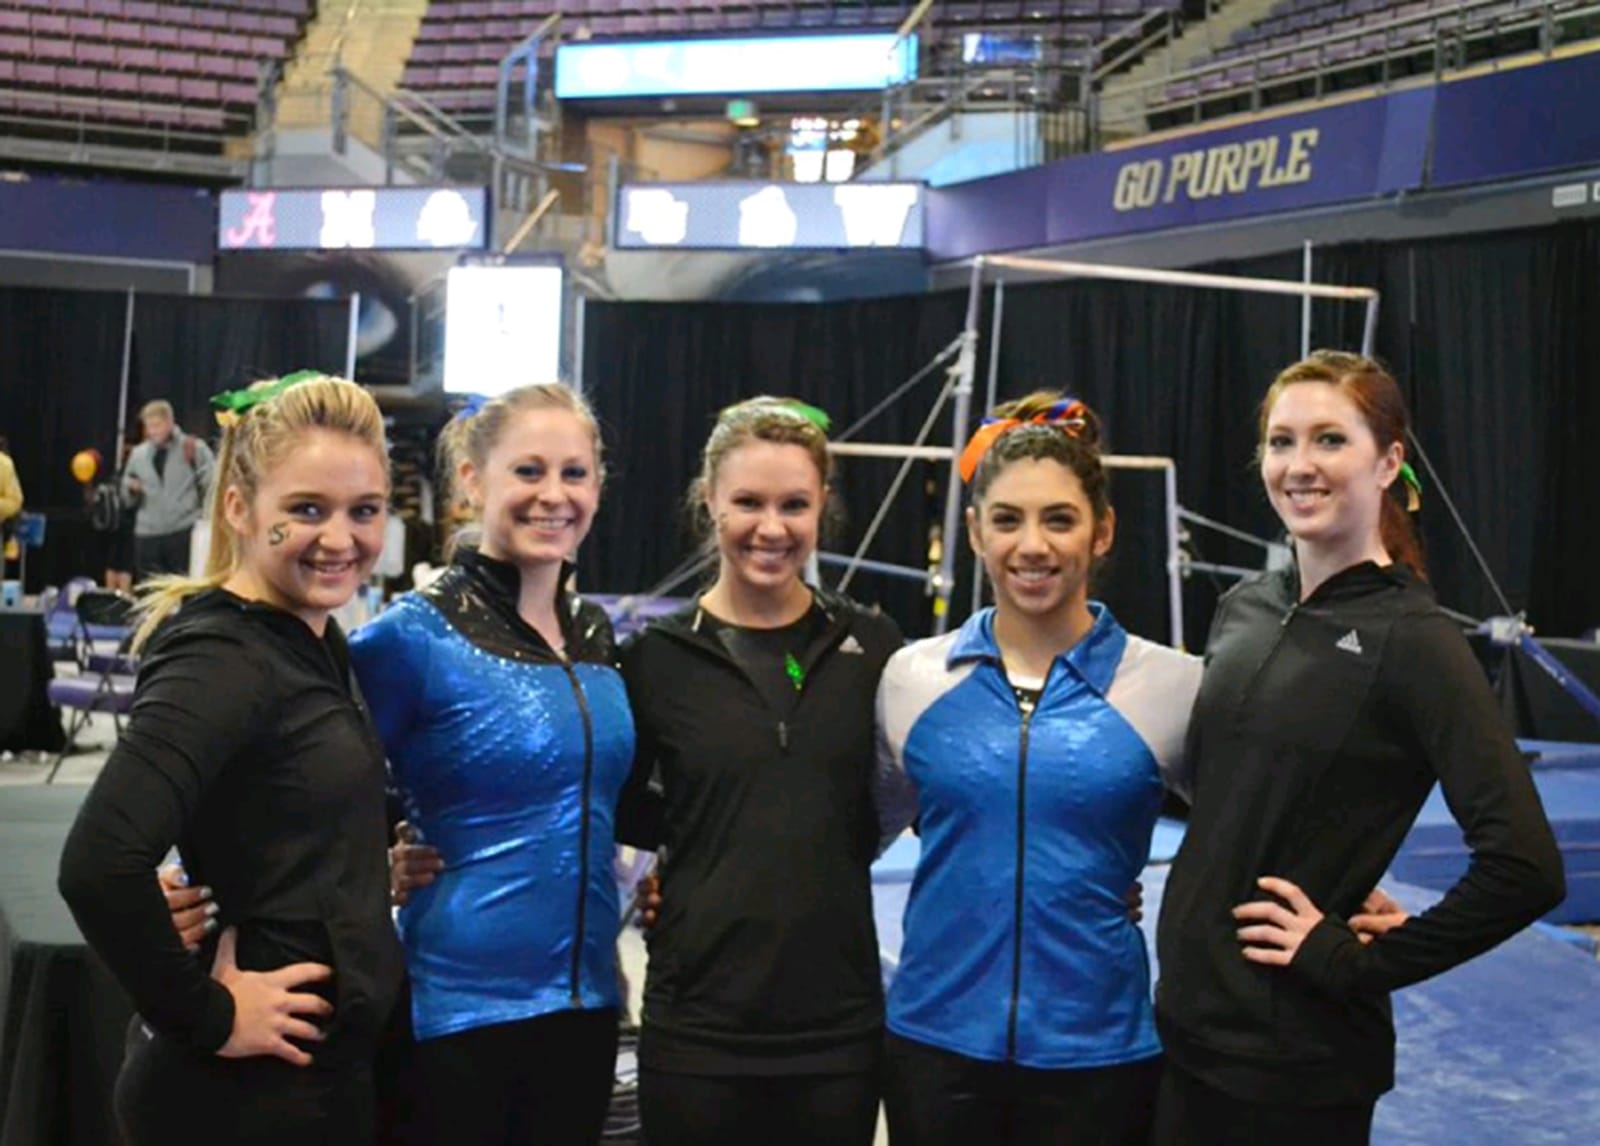 Clark County gymnasts who competed Saturday at the NCAA Seattle Regional, from left: Dallas Smith of Heisson (Sacramento State), KayCee Gassaway of Vancouver (Brigham Young), Kayla Wonderly of La Center (Sacramento State), Diana Mejia of Vancouver (Boise State) and Kalliah McCartney of Vancouver (Sacramento State).